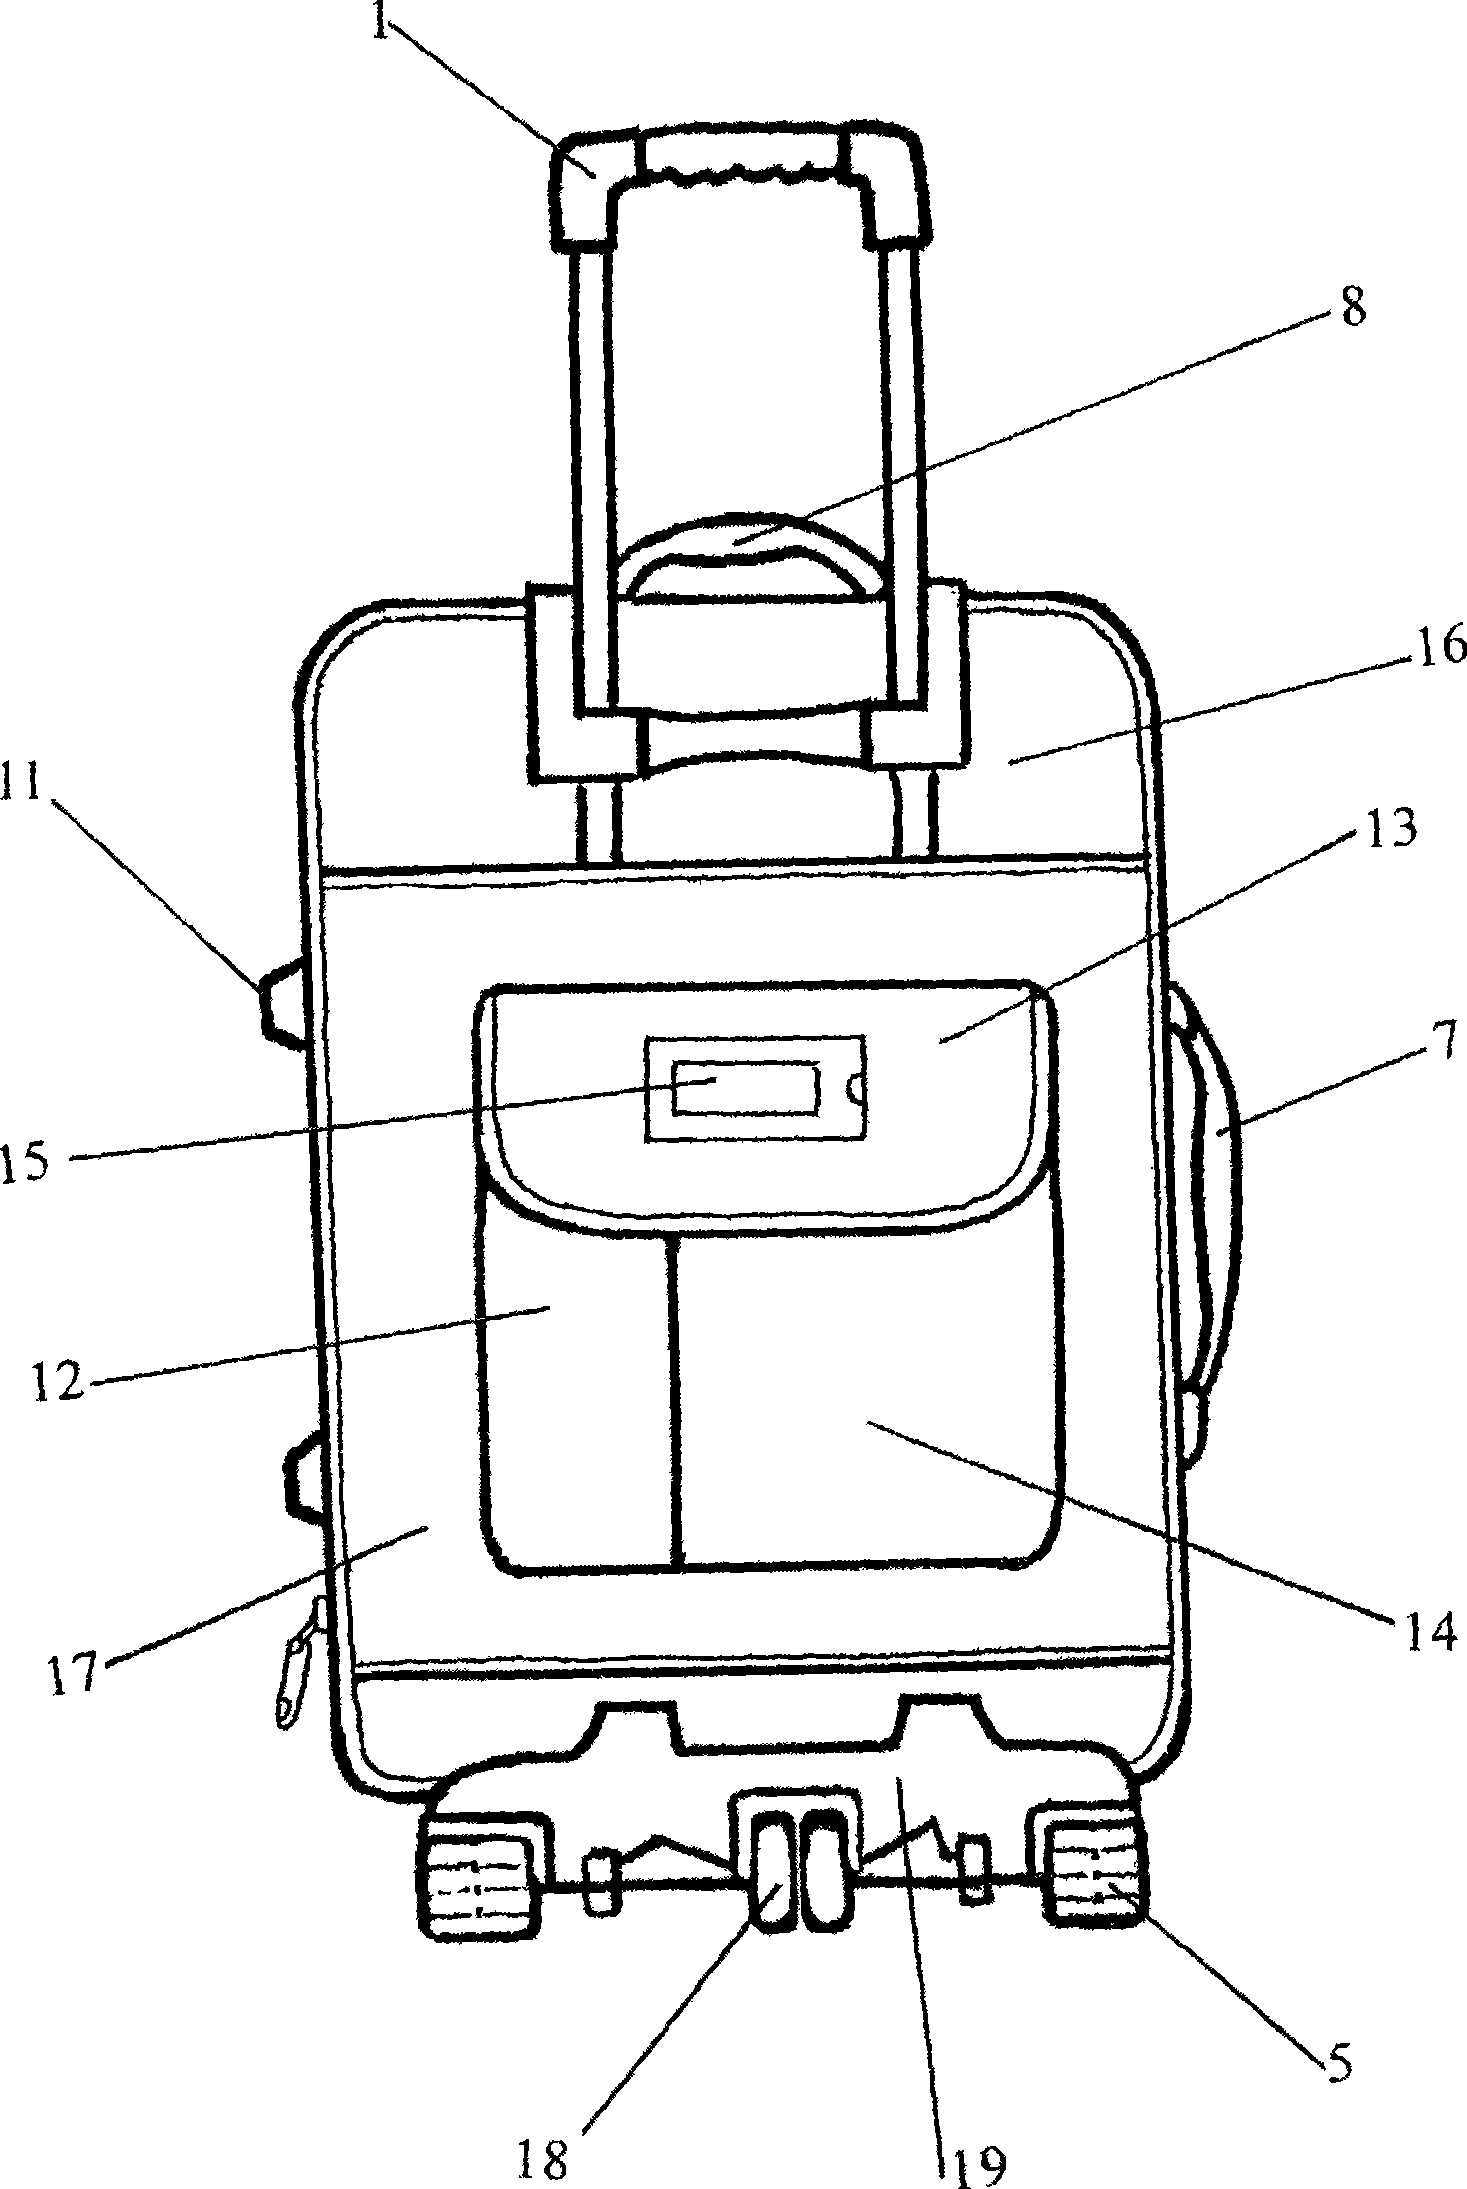 Draw bar box with two back-attached bags